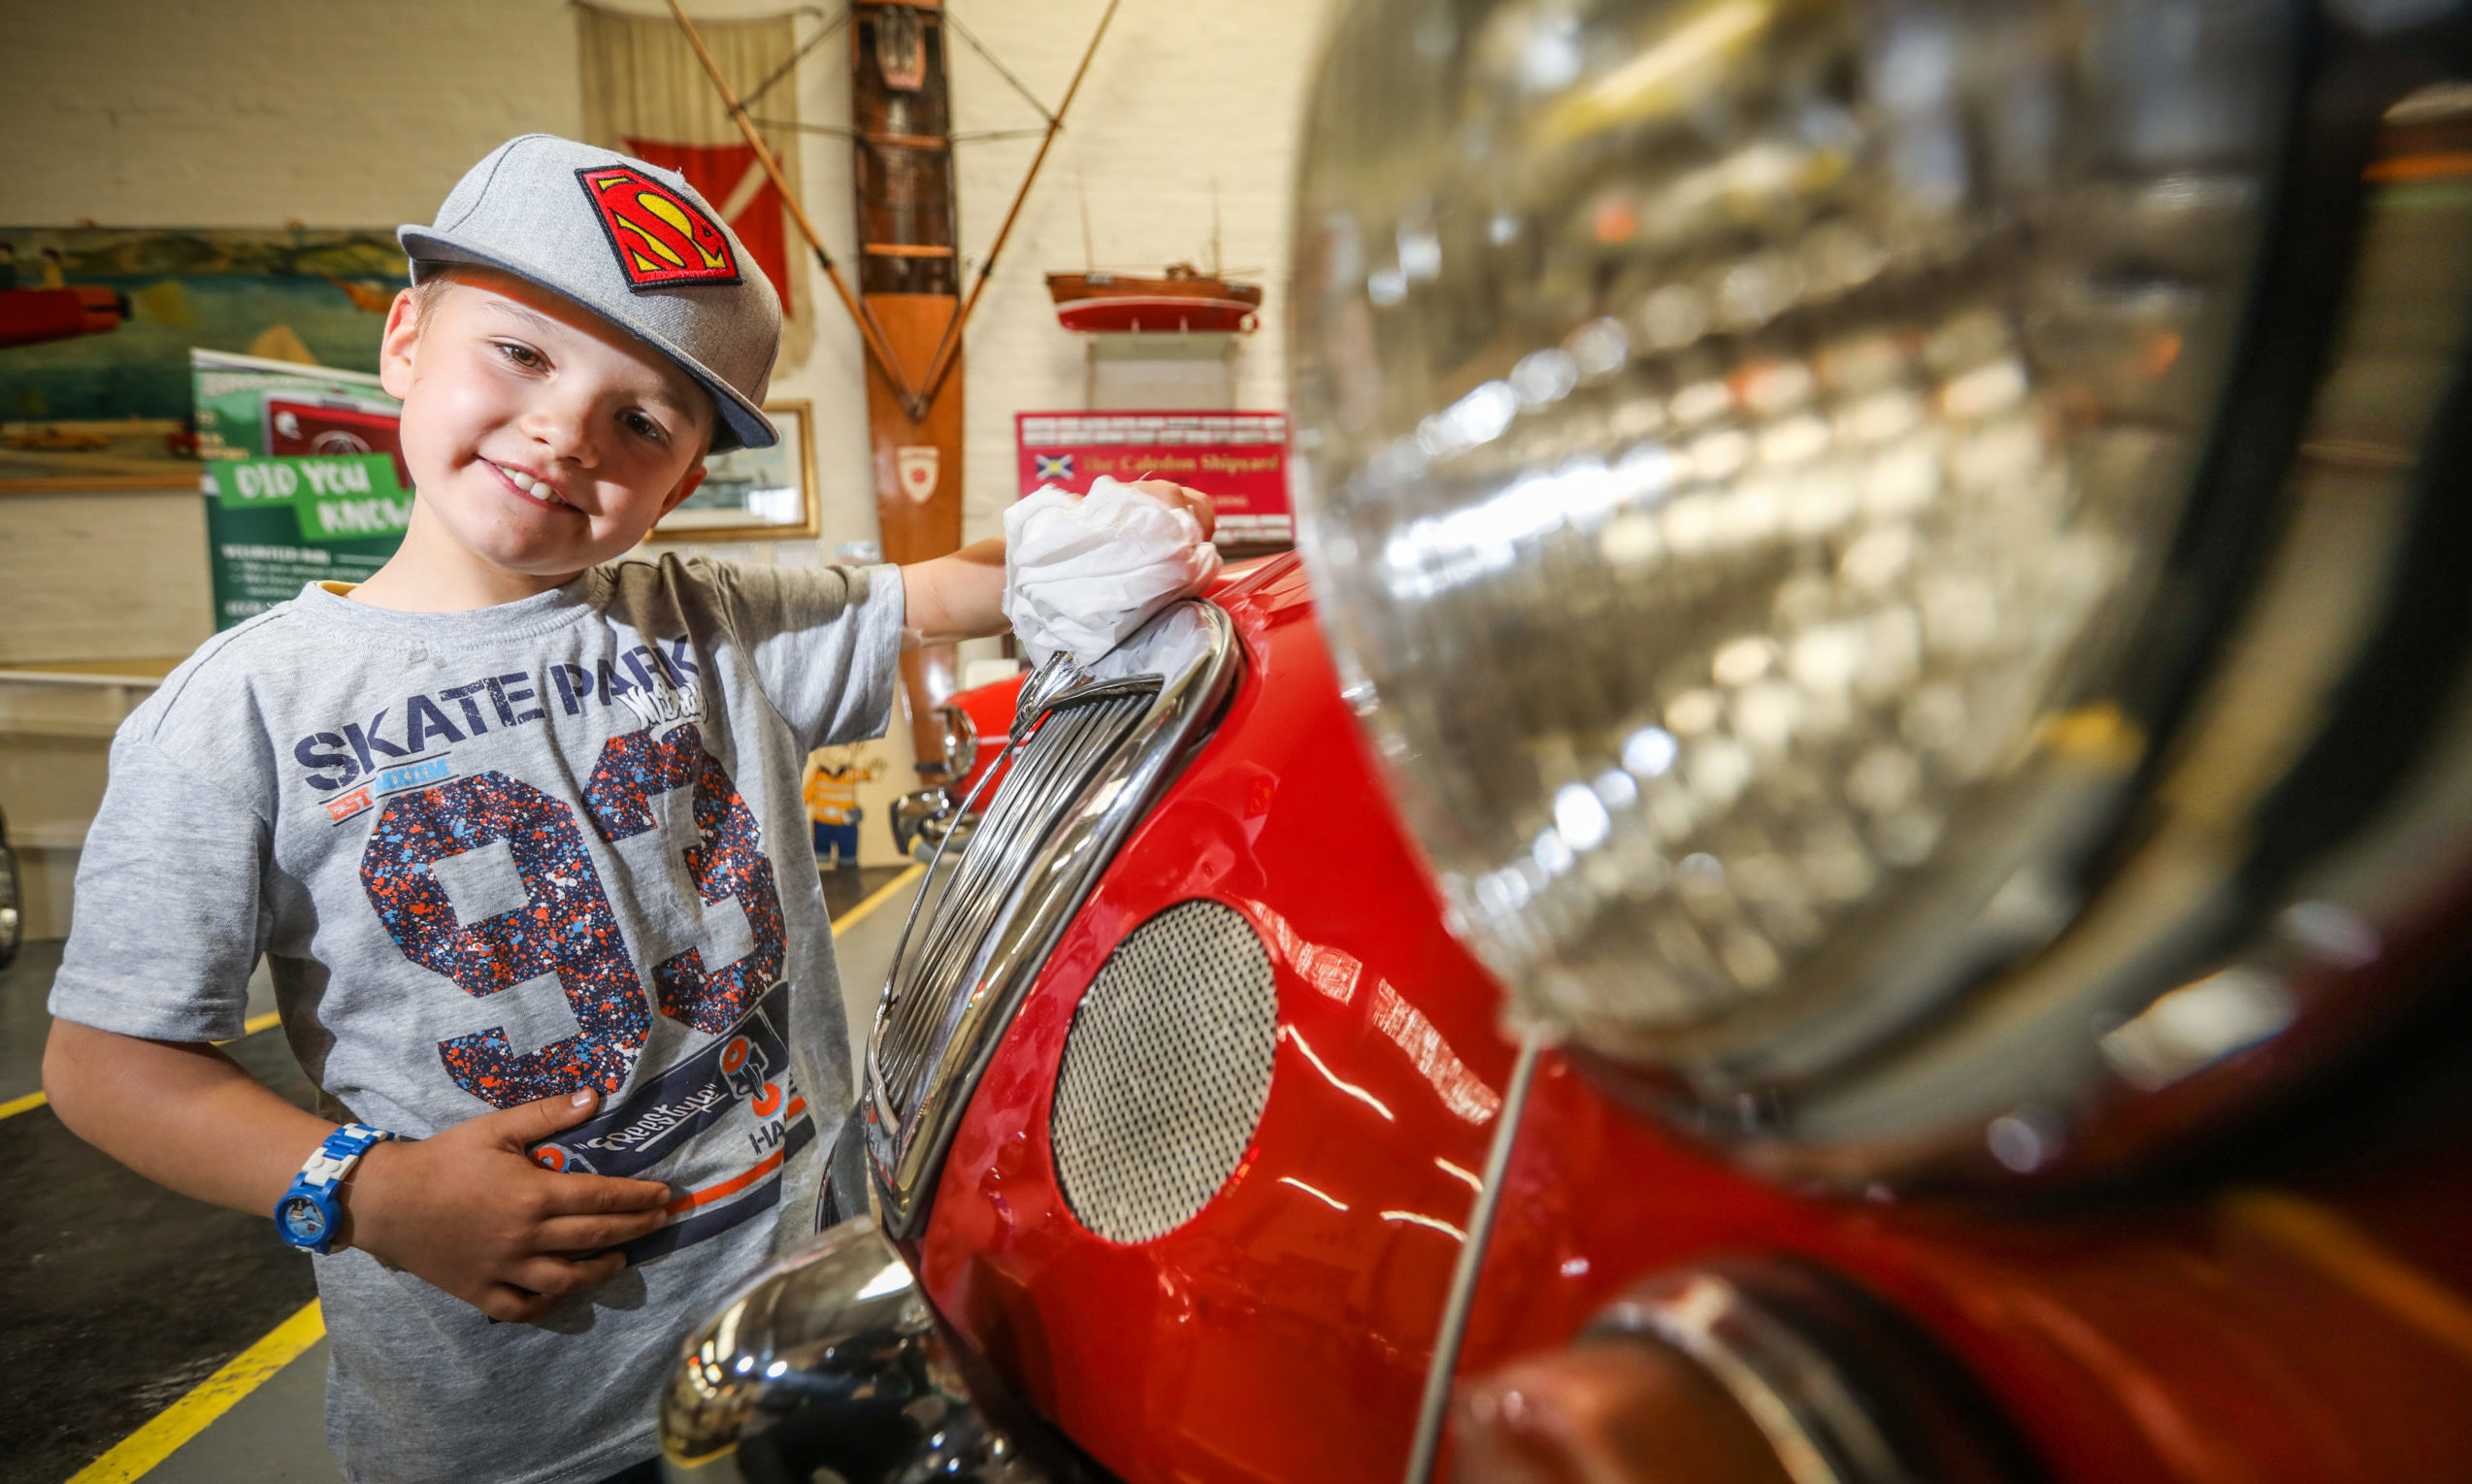 The Courier, CR0022410, News, Graham Brown story, Dundee Museum of Transport re-opens after four months due to Covid-19. Picture shows; Christopher Bieda, 7, shines one of the cars in the museum. Wednesday 15th July, 2020. Mhairi Edwards/DCT Media